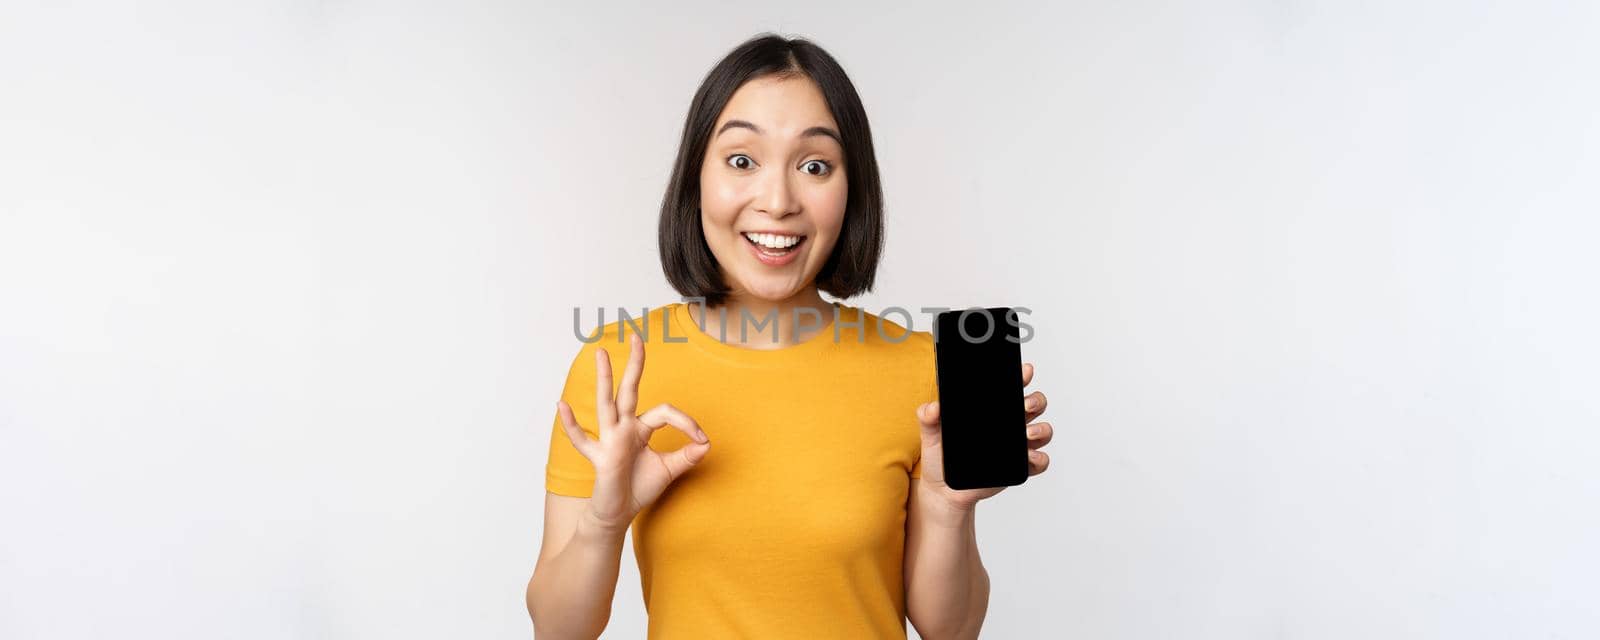 Excited asian girl showing mobile phone screen, okay sign, recommending smartphone app, standing in yellow tshirt over white background.